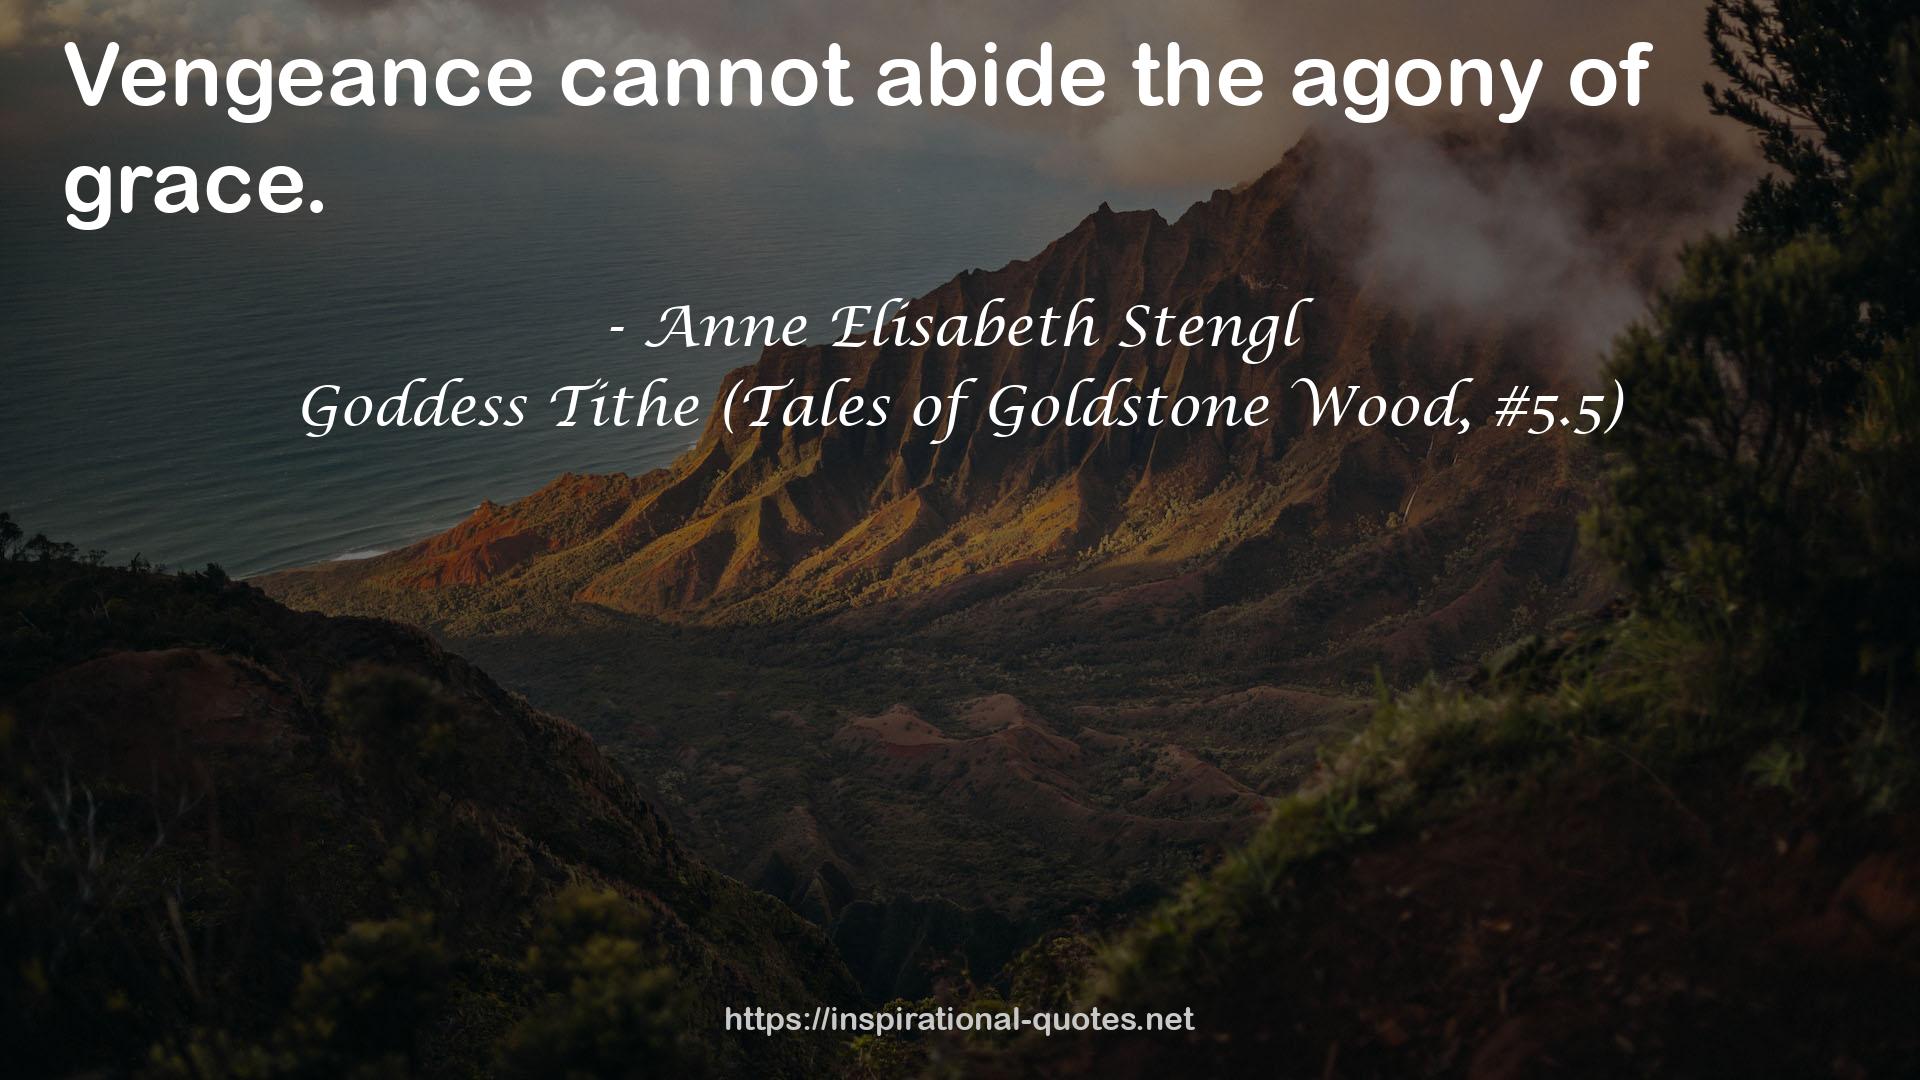 Goddess Tithe (Tales of Goldstone Wood, #5.5) QUOTES